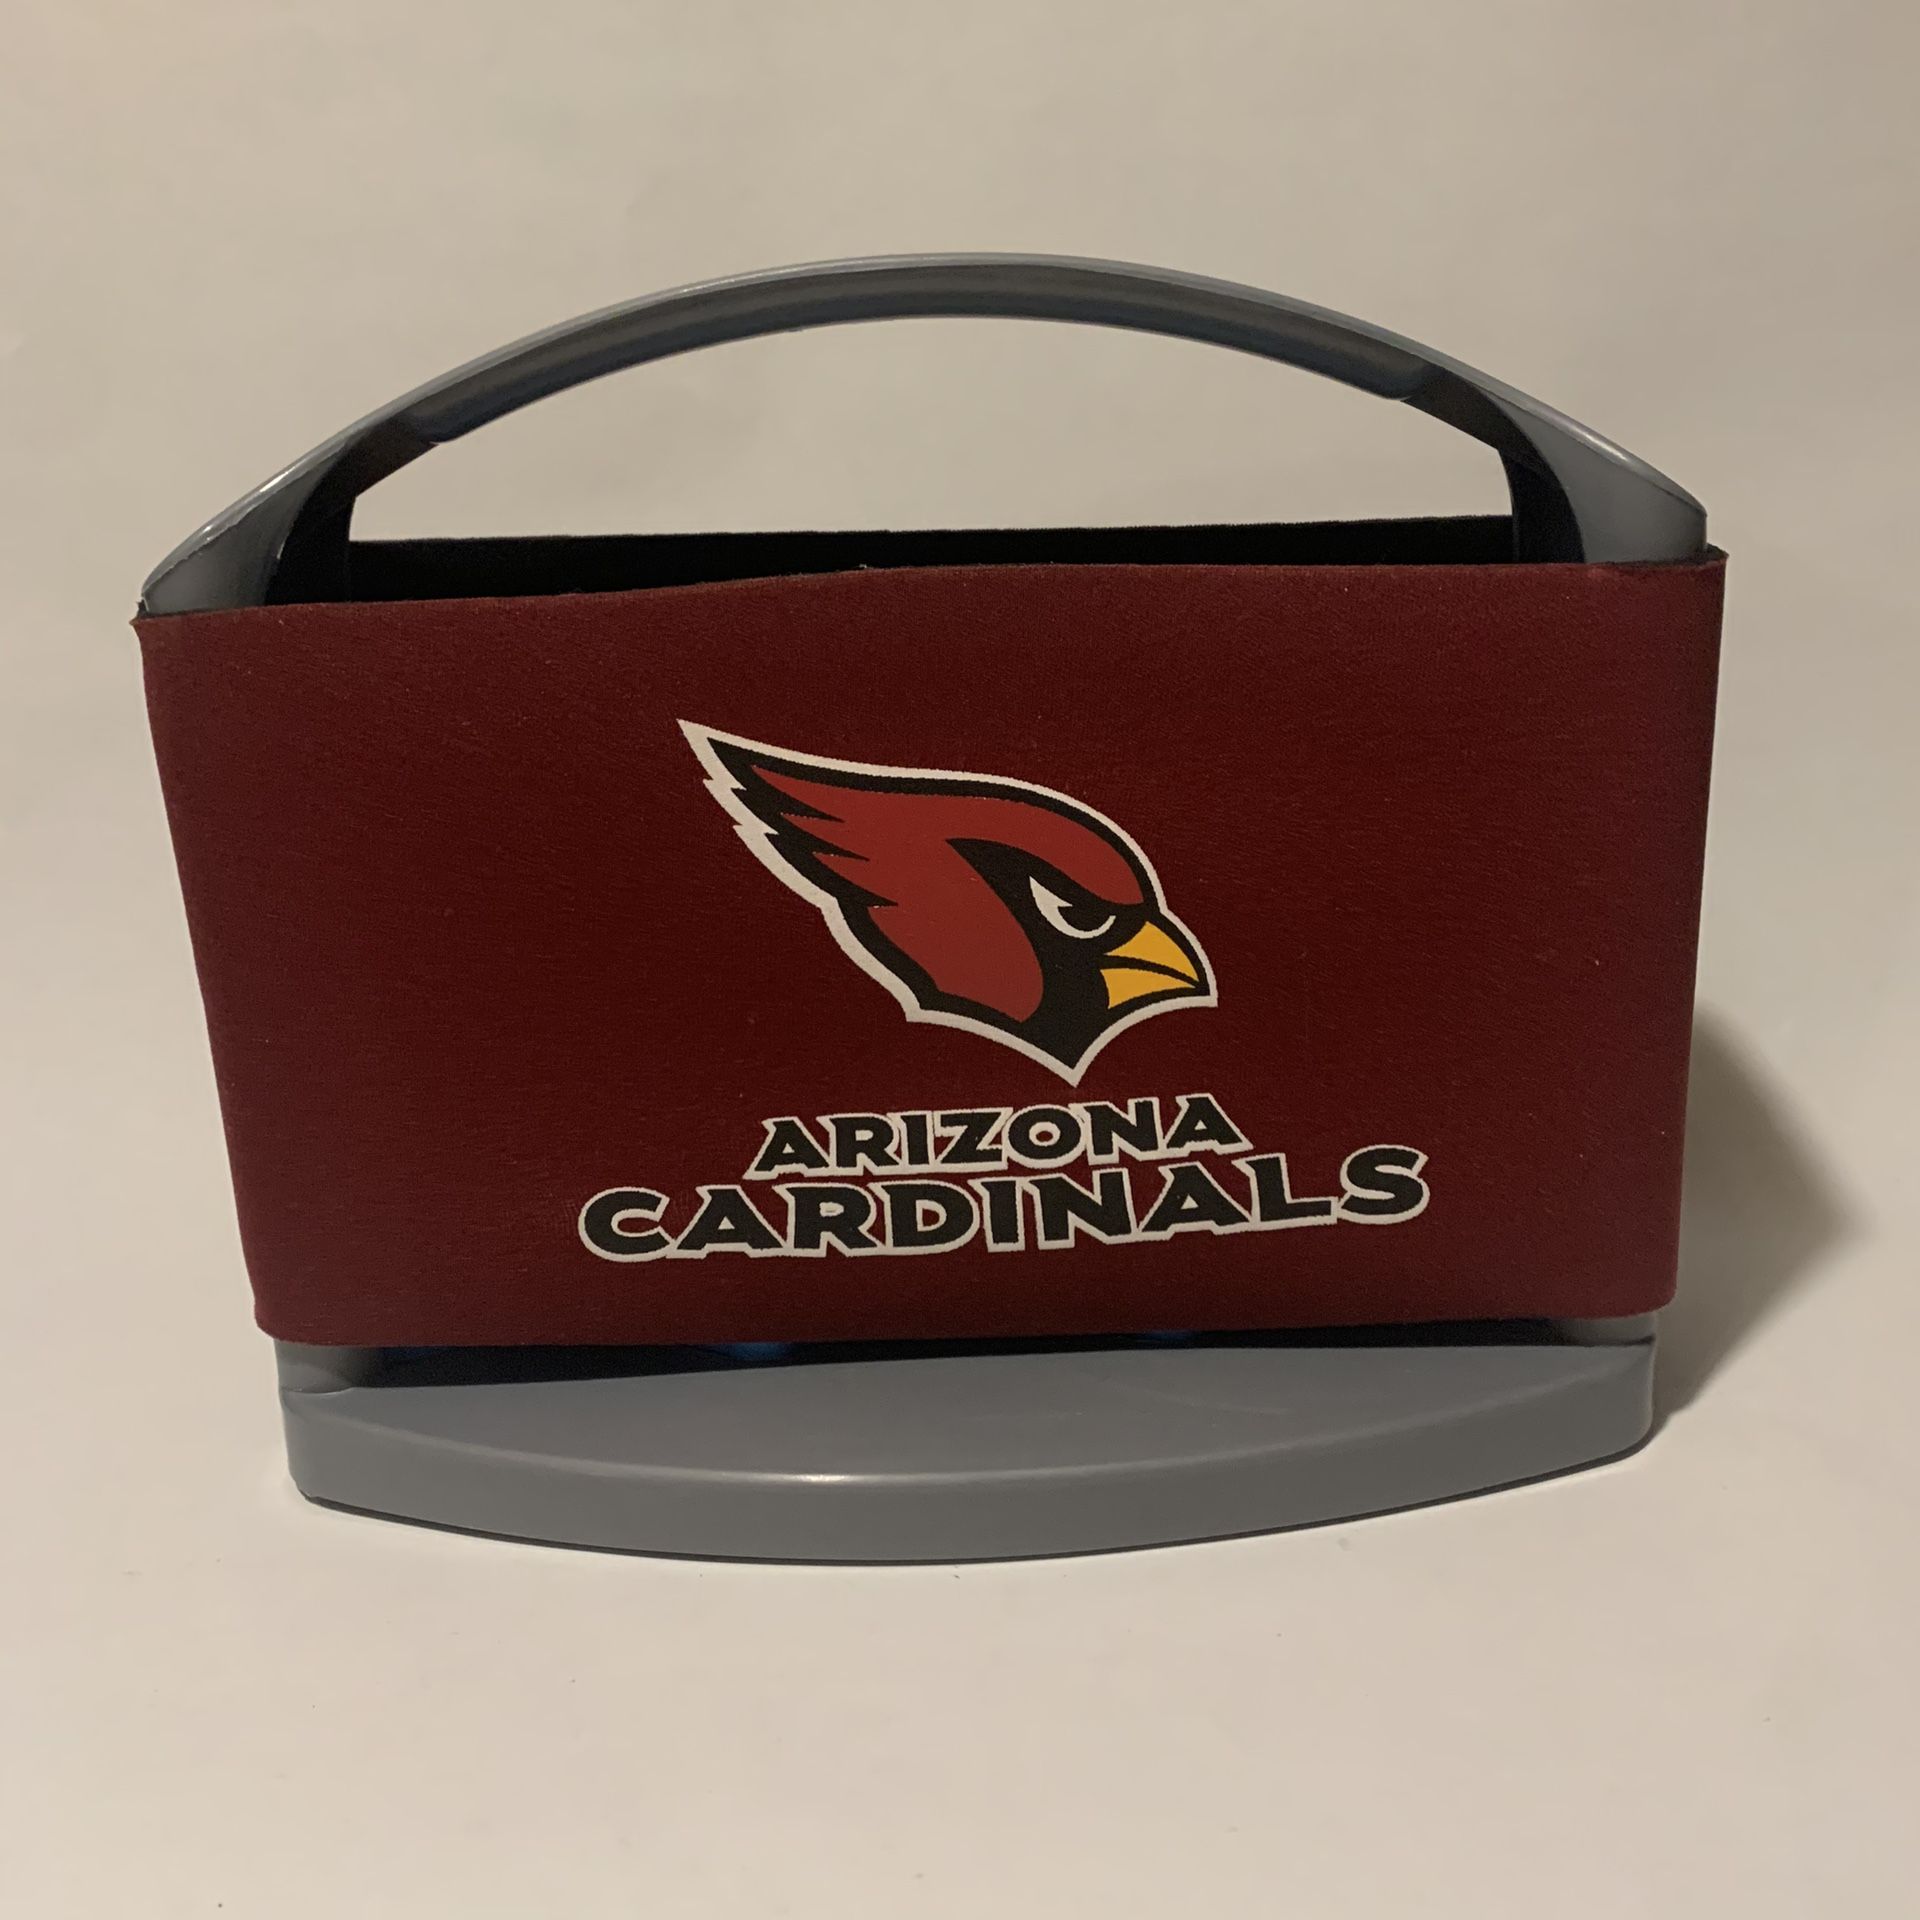 Arizona Cardinals Beer Bottle Can Cooler Carrier w/Handle 6 Pack for Tailgating